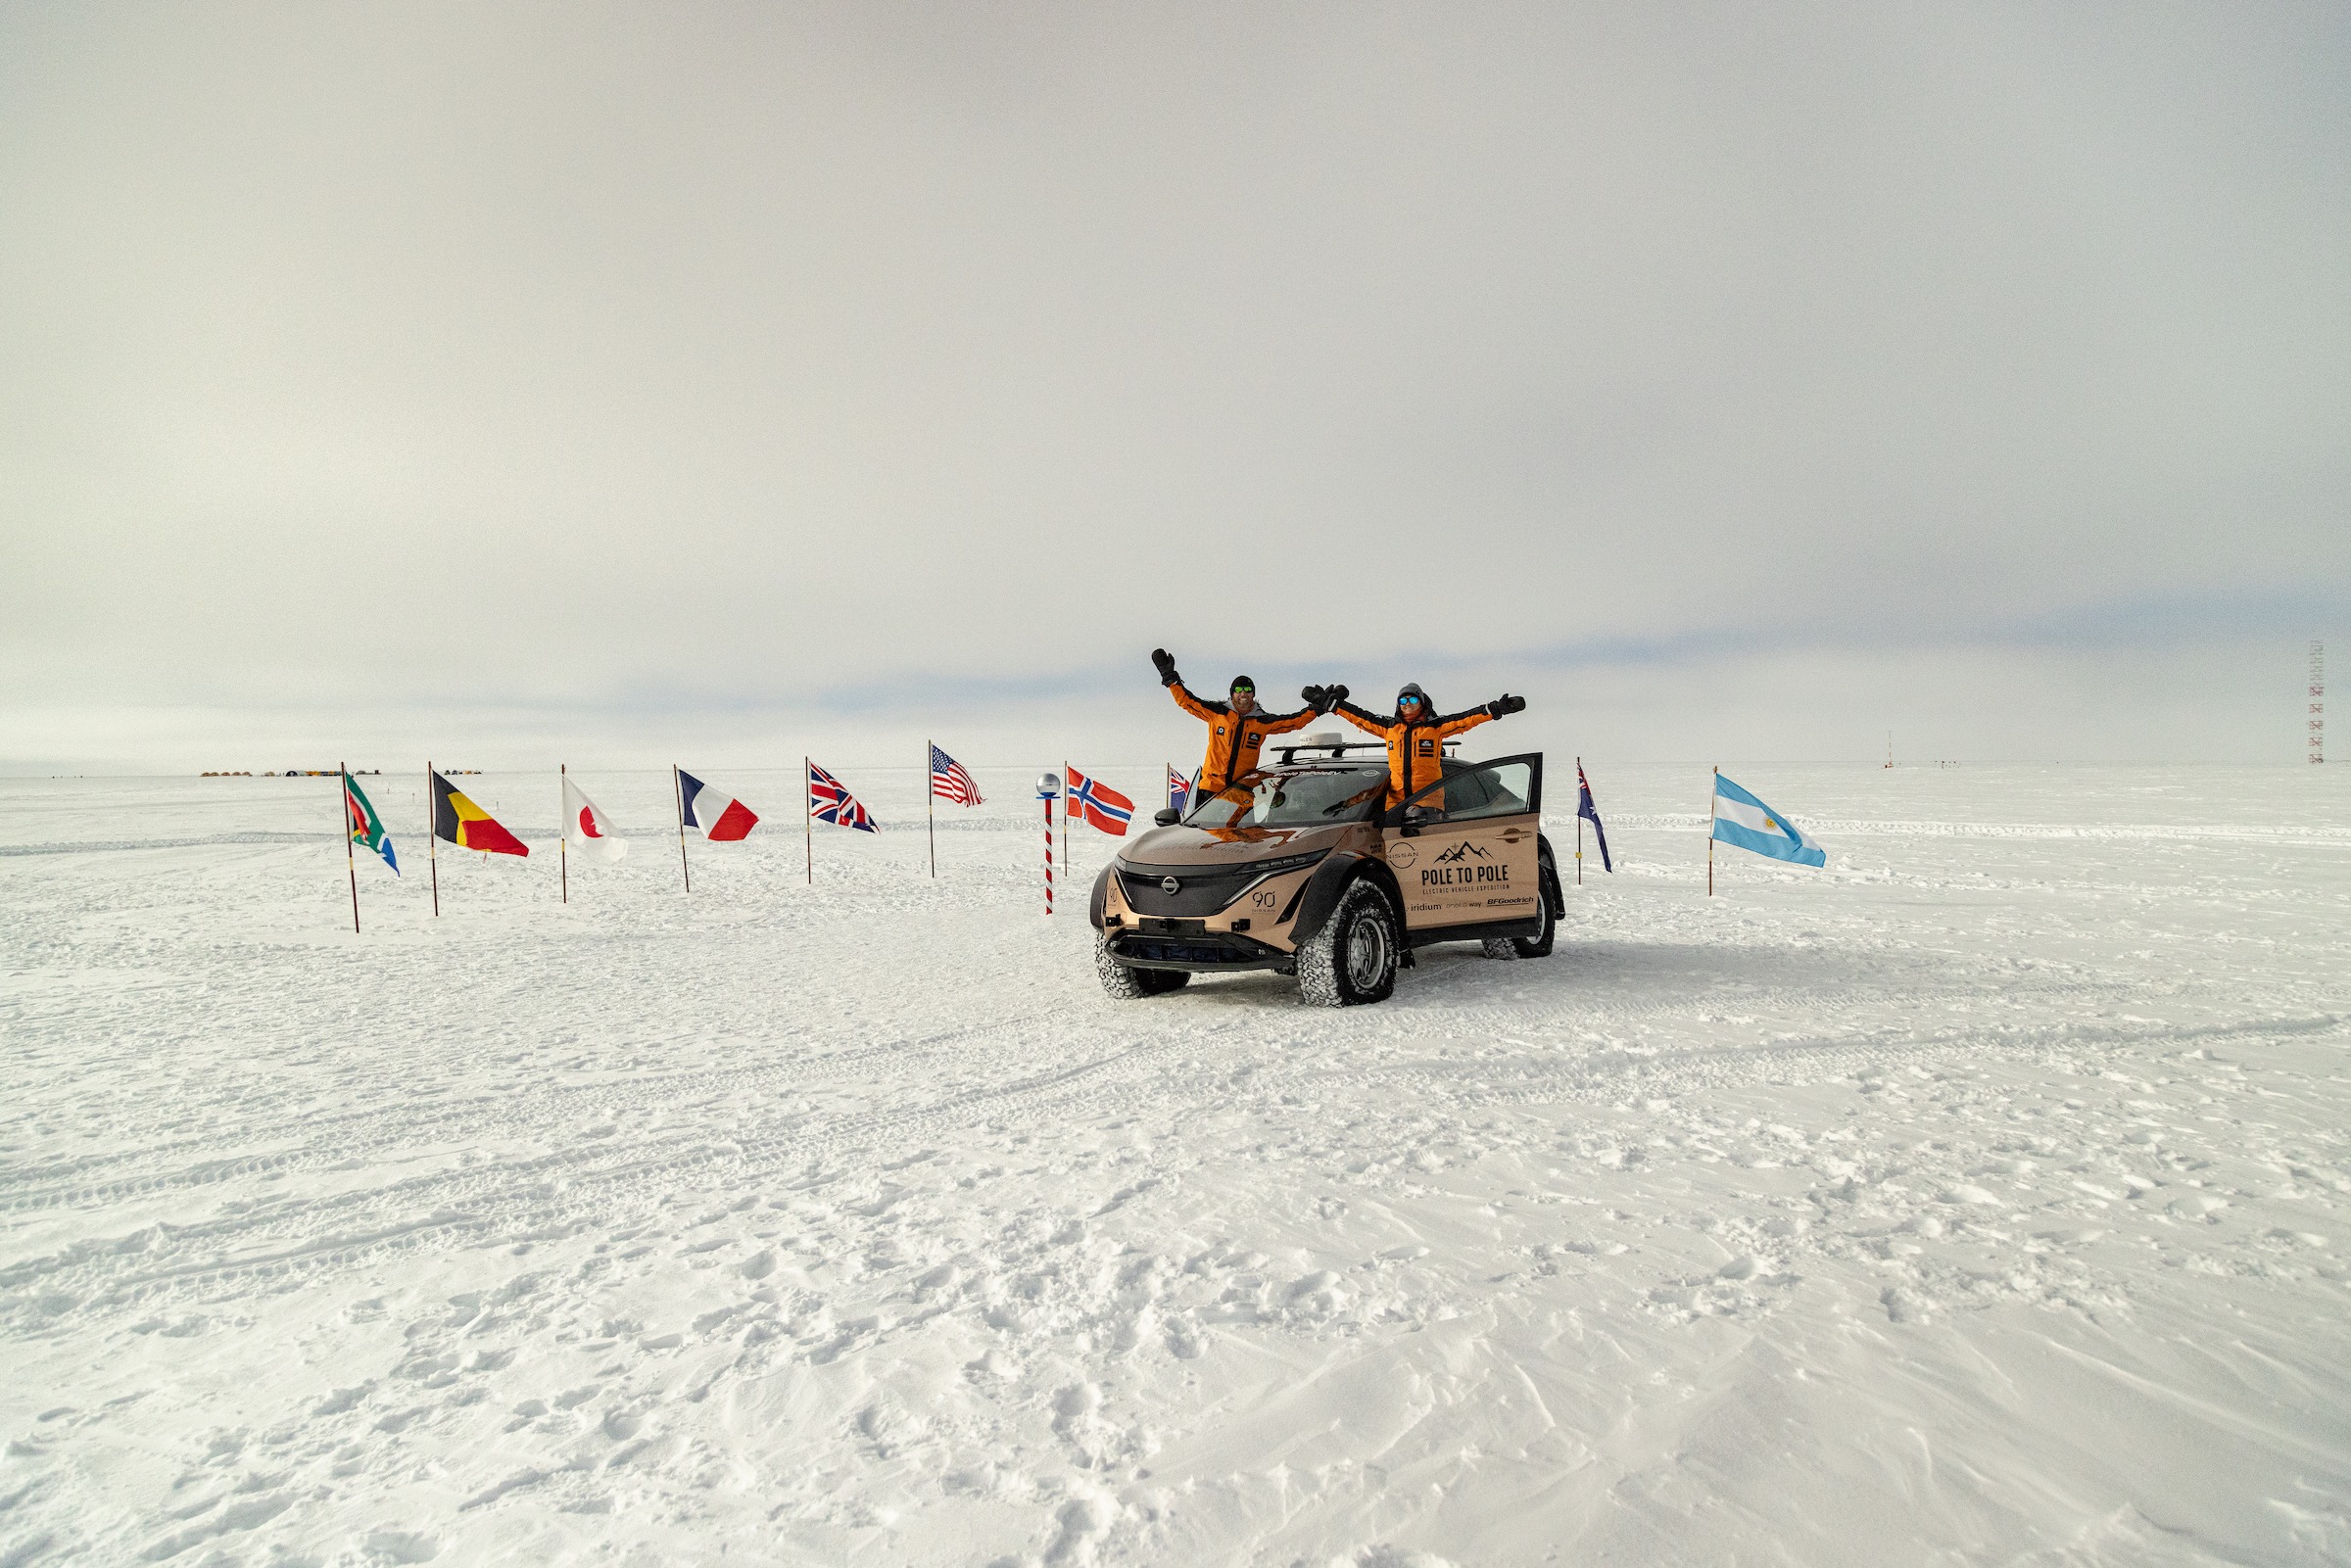 Pole to Pole electric vehicle expedition reaches the South Pole